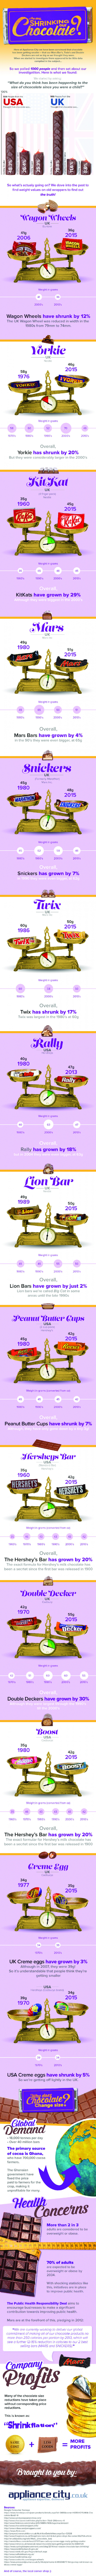 Is Our Chocolate Getting Smaller? Infographic